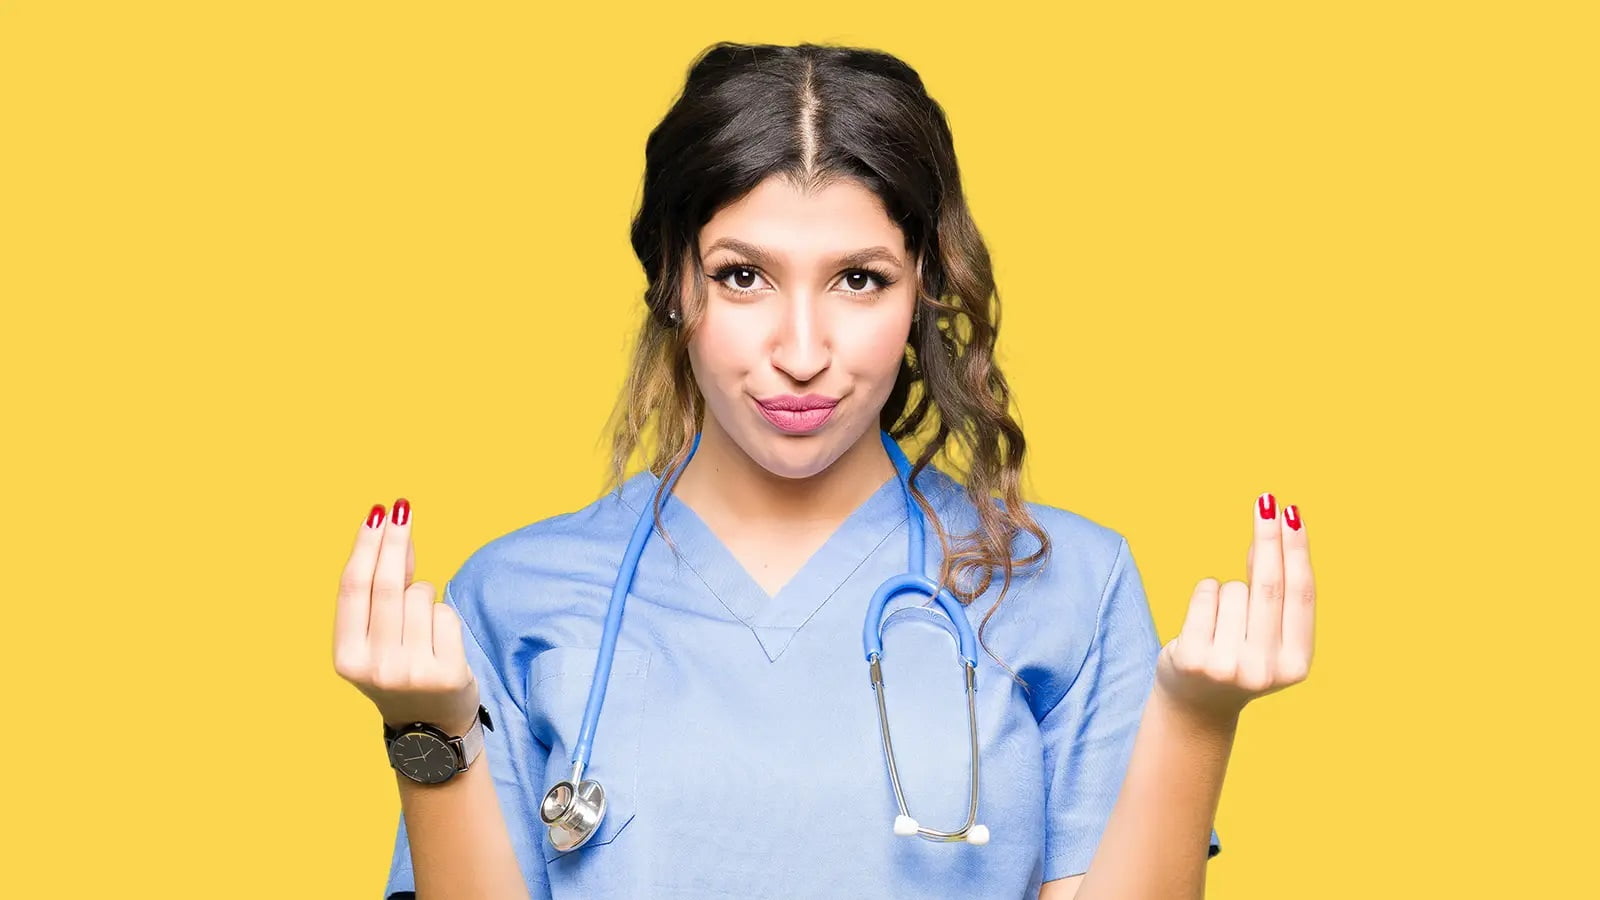 12 Lucrative Side Hustles for Nurses to Boost Their Income